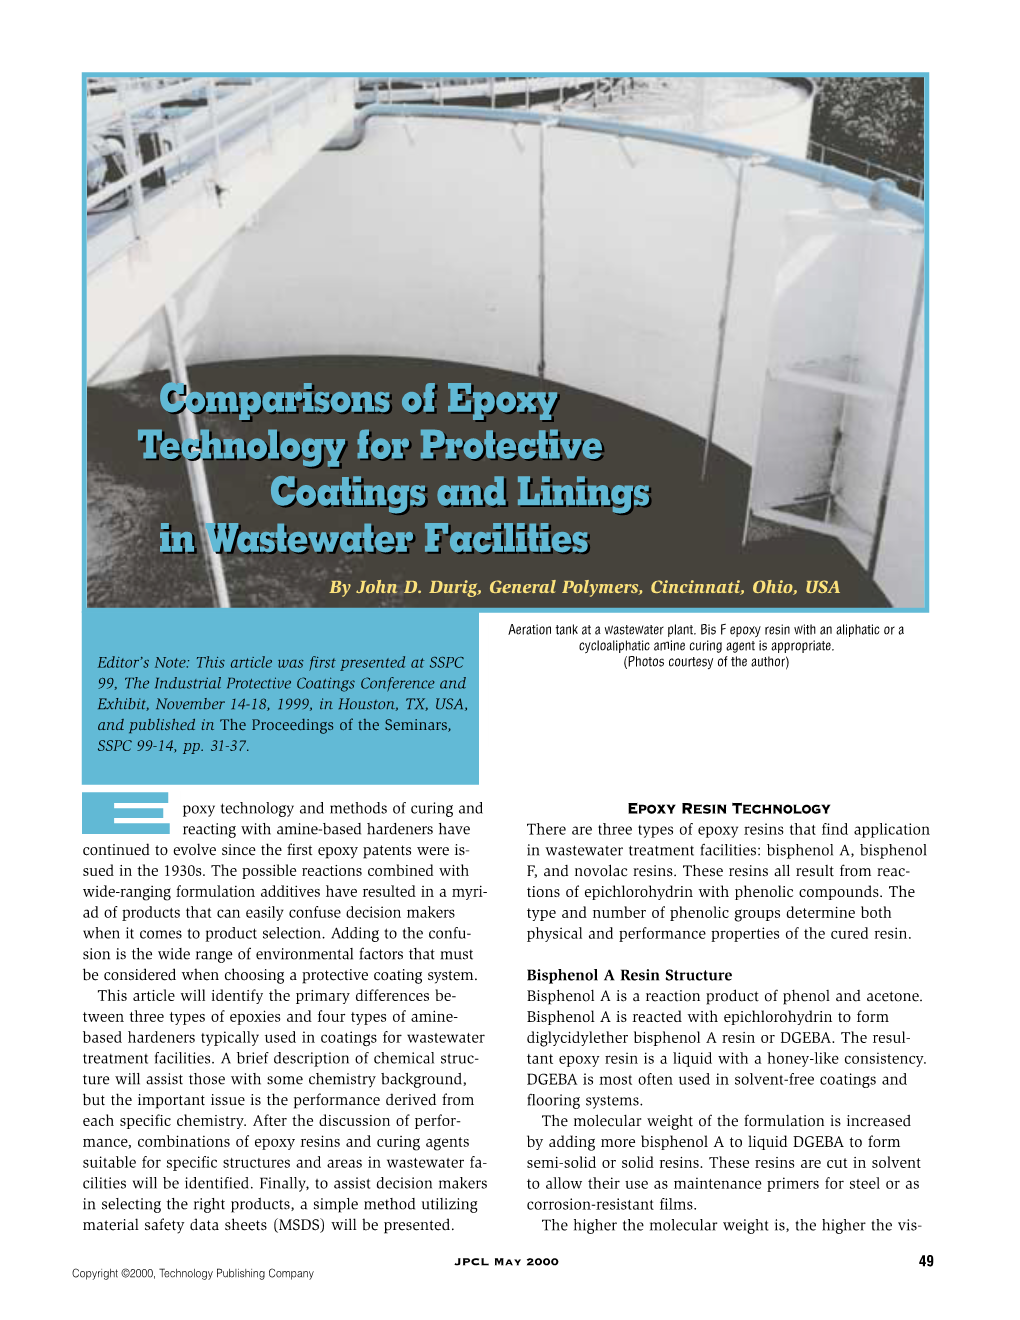 Comparisons of Epoxy Technology for Protective Coatings and Linings In